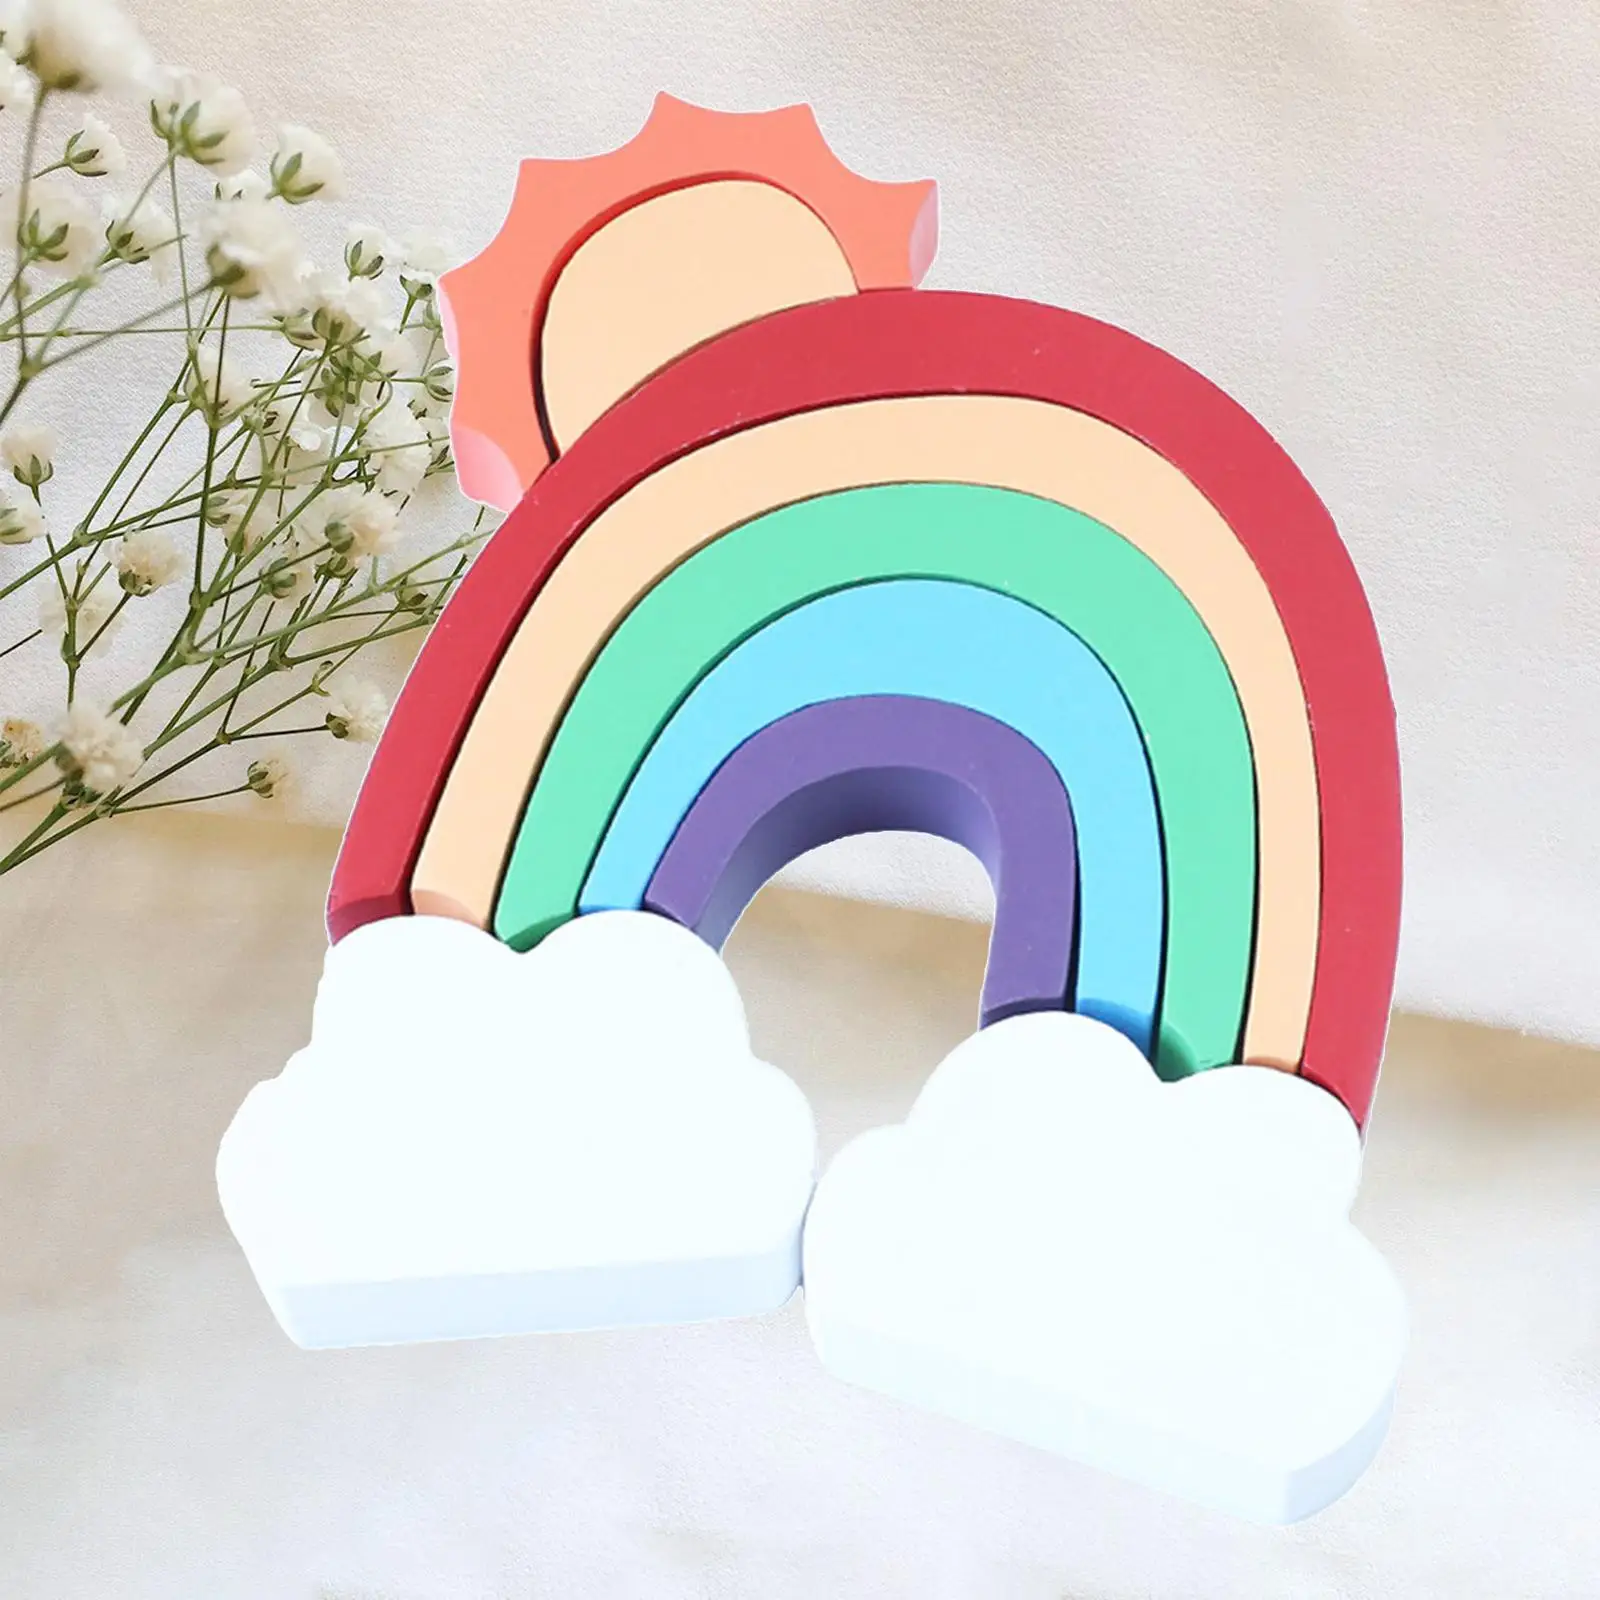 Wooden Rainbow Stacker Building Toddler Toy Educational Wooden Building Blocks for Baby